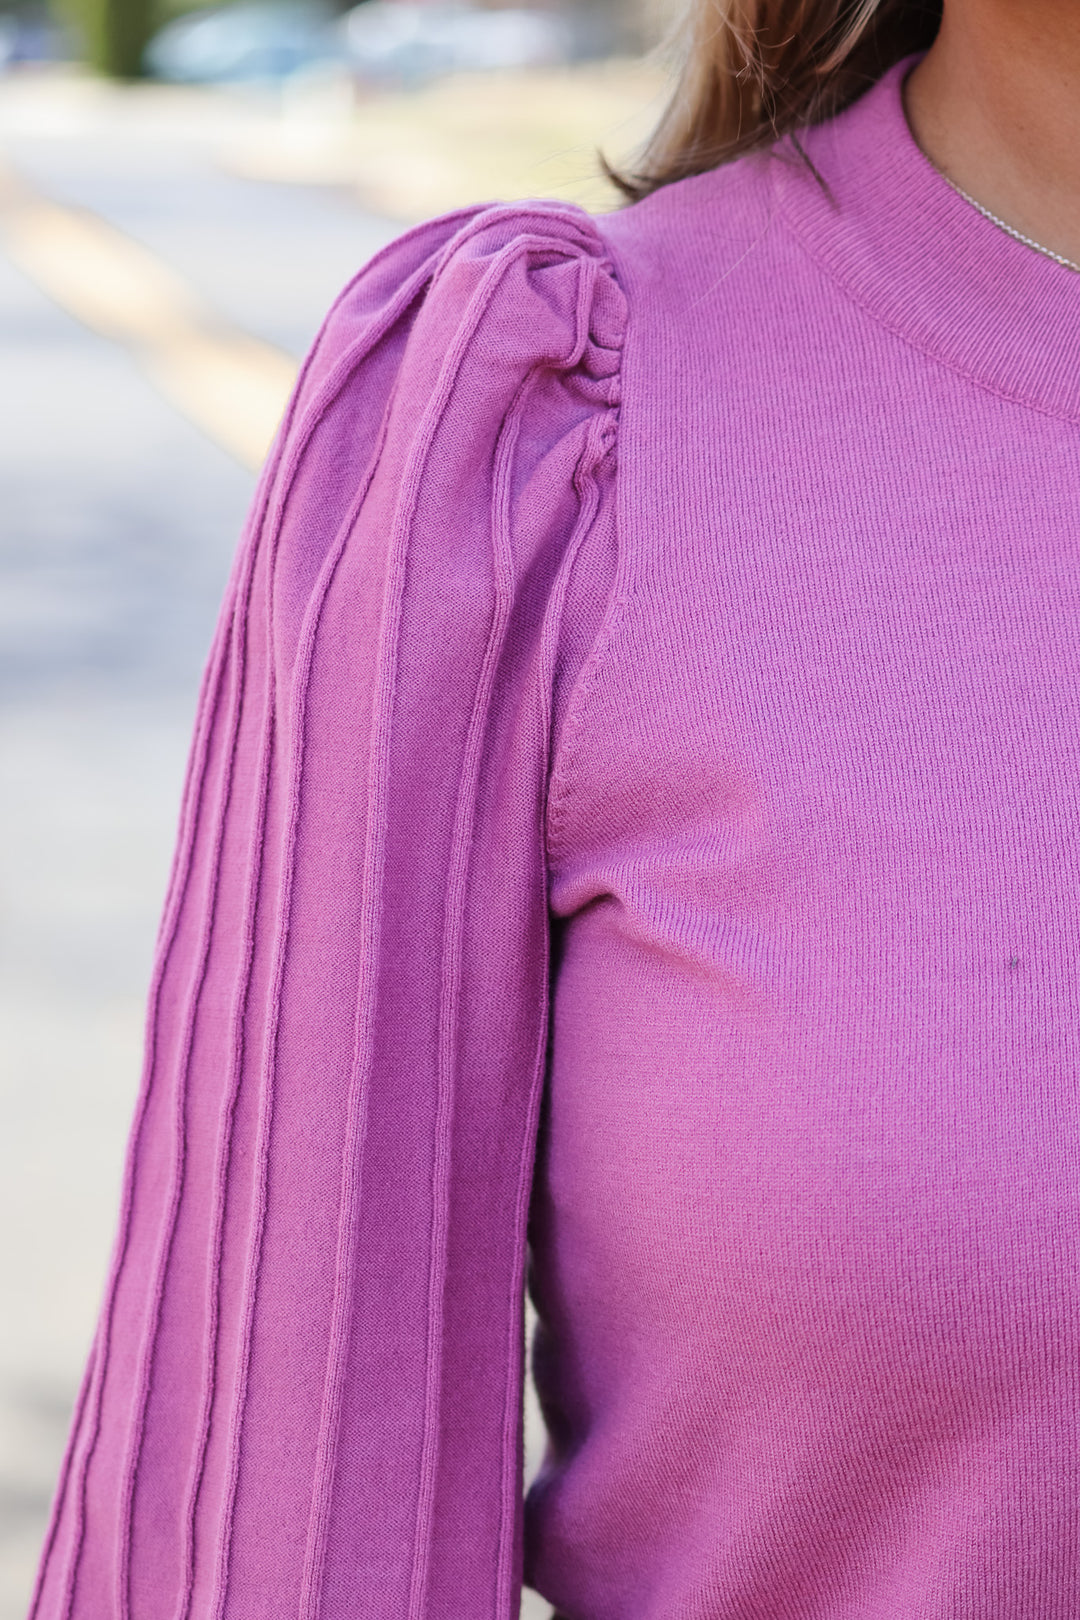 A closeup of the shoulder of a woman wearing a pink detailed long sleeve sweater.